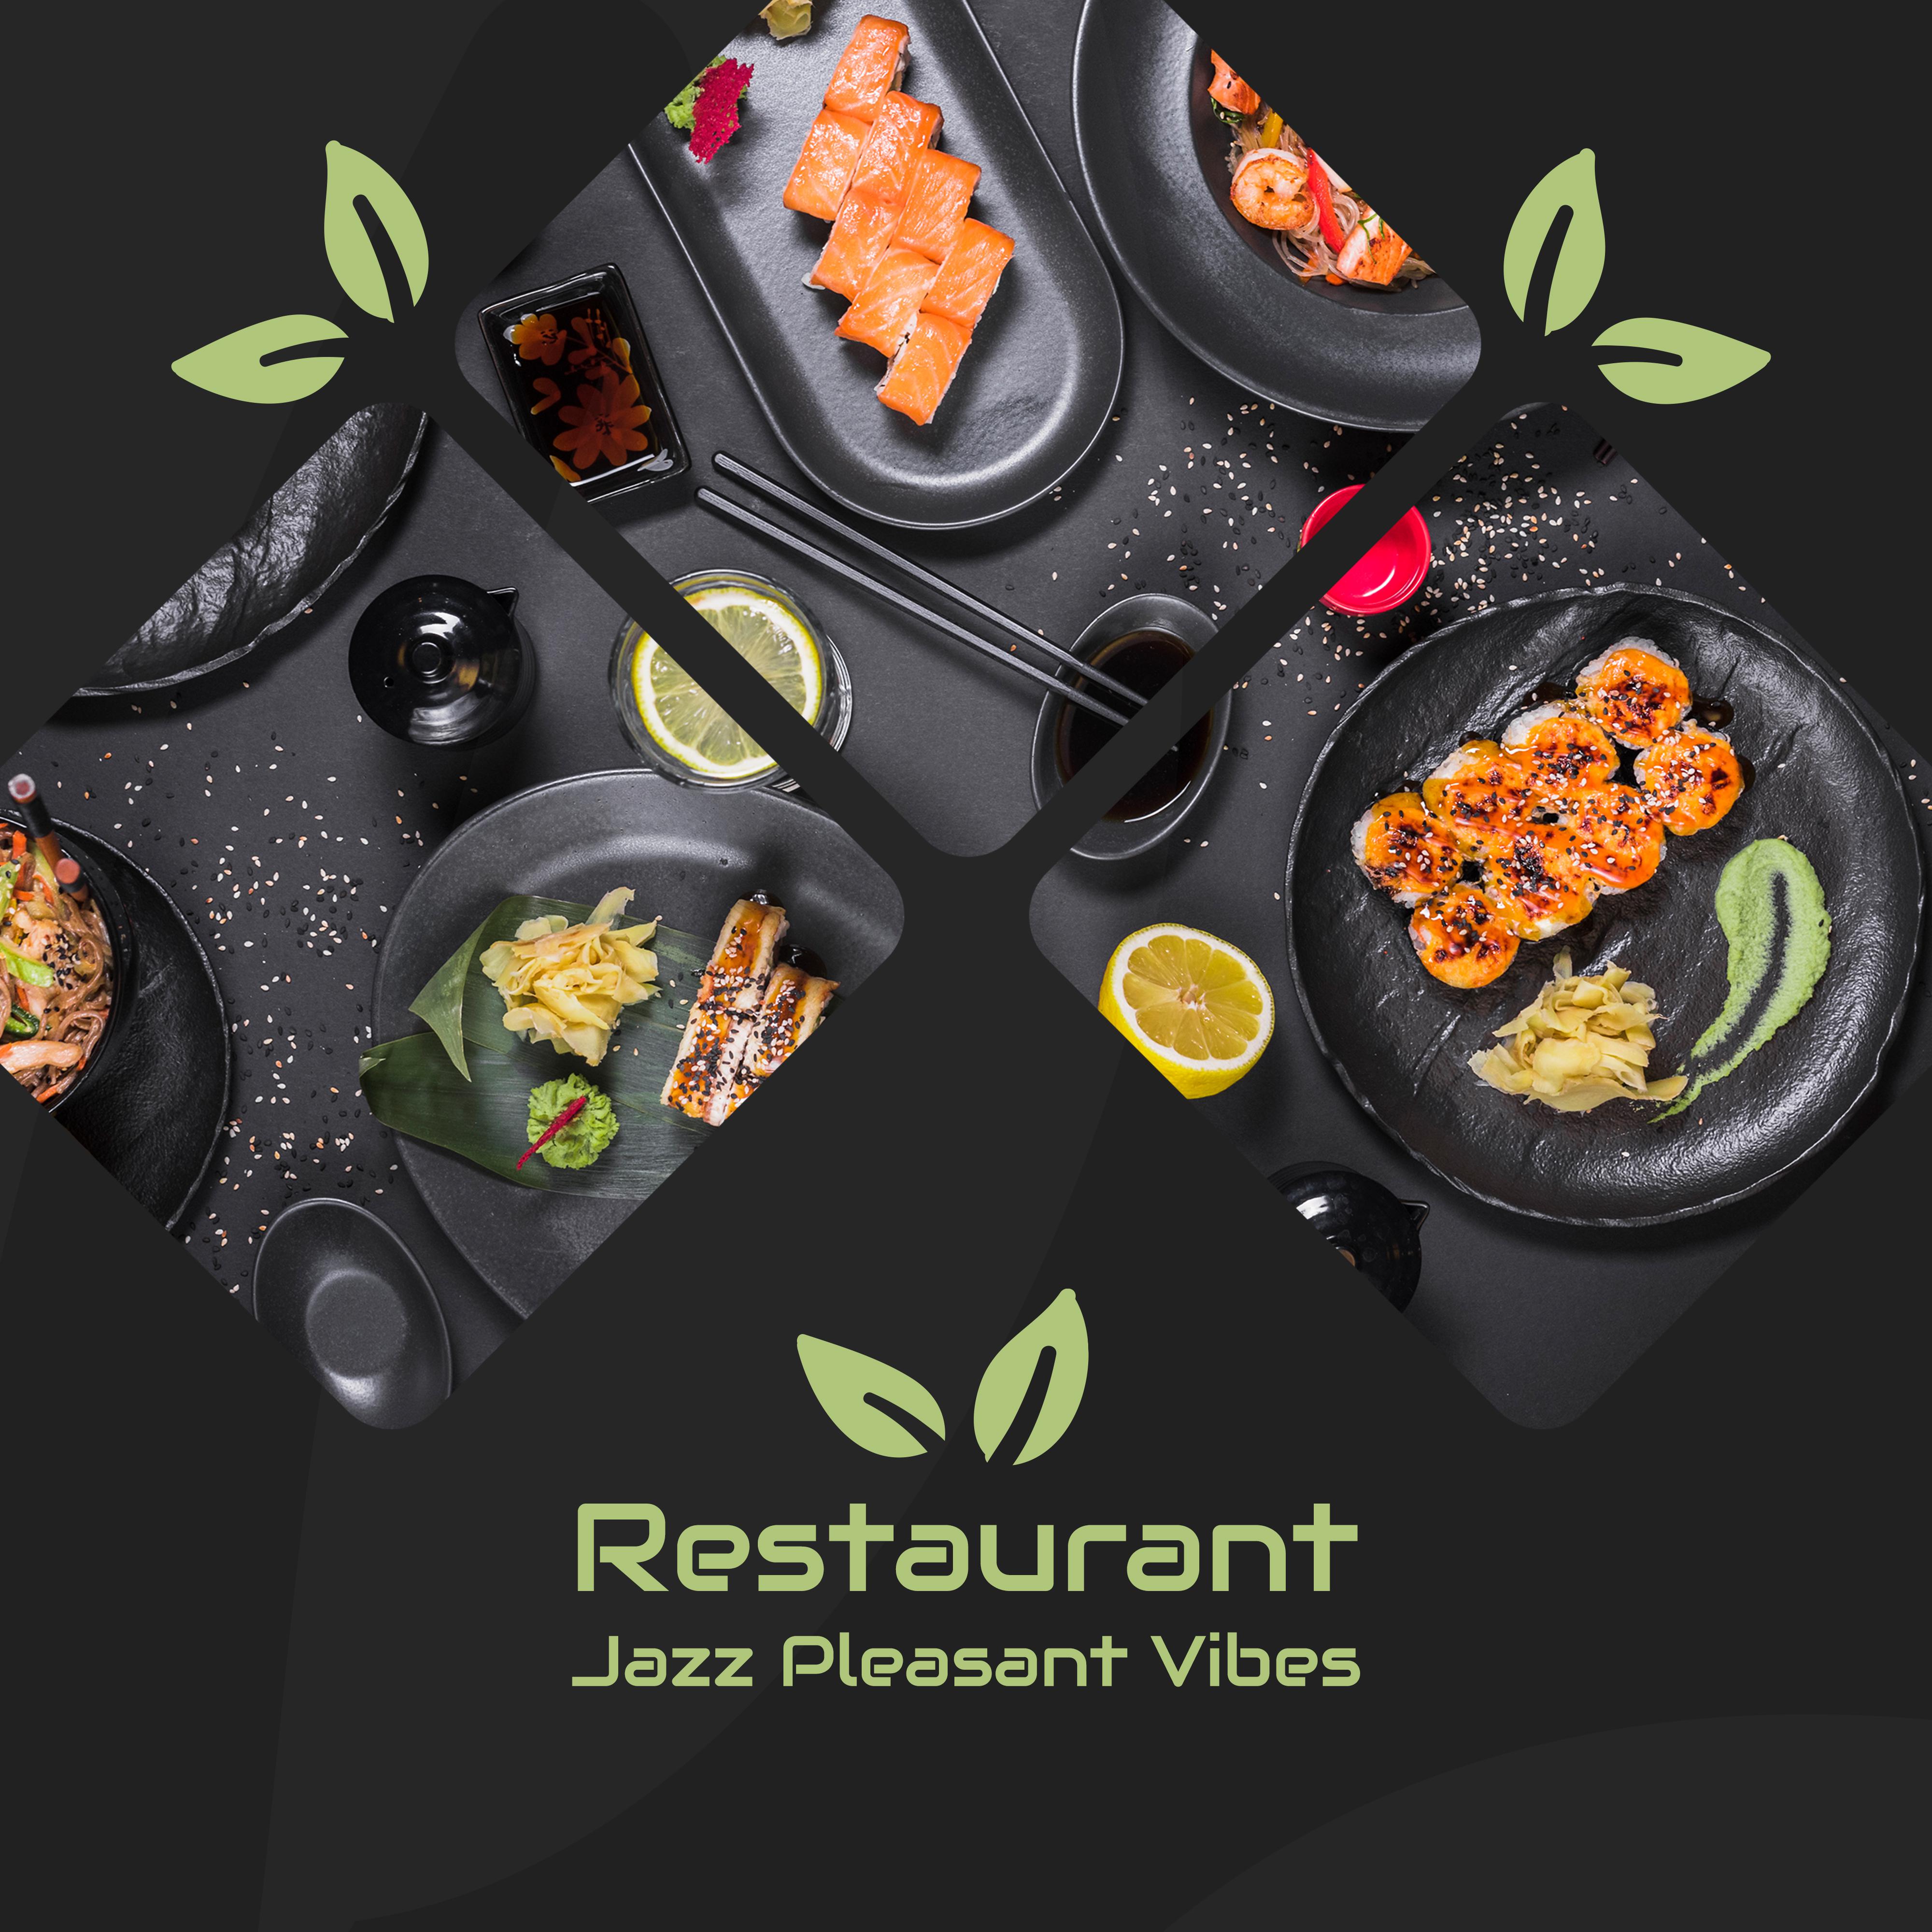 Restaurant Jazz Pleasant Vibes: Smooth Jazz Instrumental 2019 Music Compilation, Perfect Background for Restaurant or Cafe, Vintage Songs for Perfect Dinner with Family or Friends